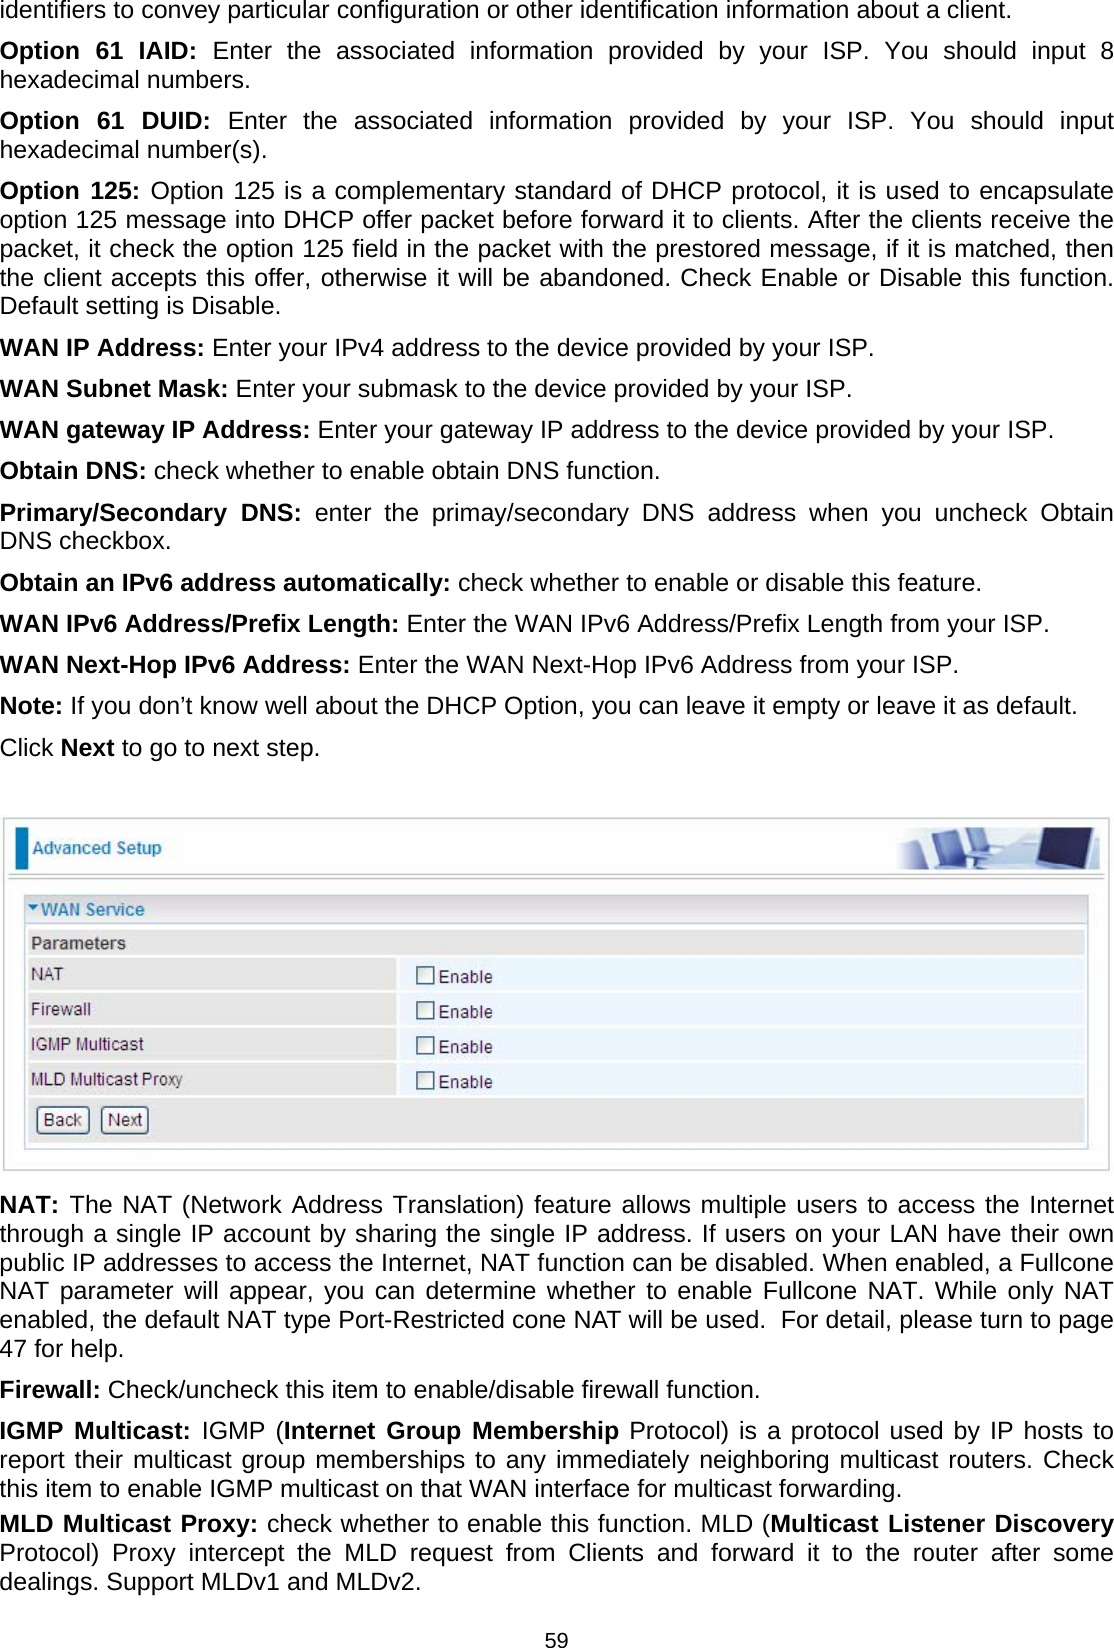  59 identifiers to convey particular configuration or other identification information about a client.  Option 61 IAID: Enter the associated information provided by your ISP. You should input 8 hexadecimal numbers.  Option 61 DUID: Enter the associated information provided by your ISP. You should input hexadecimal number(s). Option 125: Option 125 is a complementary standard of DHCP protocol, it is used to encapsulate option 125 message into DHCP offer packet before forward it to clients. After the clients receive the packet, it check the option 125 field in the packet with the prestored message, if it is matched, then the client accepts this offer, otherwise it will be abandoned. Check Enable or Disable this function. Default setting is Disable.  WAN IP Address: Enter your IPv4 address to the device provided by your ISP.  WAN Subnet Mask: Enter your submask to the device provided by your ISP. WAN gateway IP Address: Enter your gateway IP address to the device provided by your ISP.  Obtain DNS: check whether to enable obtain DNS function. Primary/Secondary DNS: enter the primay/secondary DNS address when you uncheck Obtain DNS checkbox.  Obtain an IPv6 address automatically: check whether to enable or disable this feature. WAN IPv6 Address/Prefix Length: Enter the WAN IPv6 Address/Prefix Length from your ISP. WAN Next-Hop IPv6 Address: Enter the WAN Next-Hop IPv6 Address from your ISP. Note: If you don’t know well about the DHCP Option, you can leave it empty or leave it as default. Click Next to go to next step.   NAT: The NAT (Network Address Translation) feature allows multiple users to access the Internet through a single IP account by sharing the single IP address. If users on your LAN have their own public IP addresses to access the Internet, NAT function can be disabled. When enabled, a Fullcone NAT parameter will appear, you can determine whether to enable Fullcone NAT. While only NAT enabled, the default NAT type Port-Restricted cone NAT will be used.  For detail, please turn to page 47 for help. Firewall: Check/uncheck this item to enable/disable firewall function. IGMP Multicast: IGMP (Internet Group Membership Protocol) is a protocol used by IP hosts to report their multicast group memberships to any immediately neighboring multicast routers. Check this item to enable IGMP multicast on that WAN interface for multicast forwarding. MLD Multicast Proxy: check whether to enable this function. MLD (Multicast Listener Discovery Protocol) Proxy intercept the MLD request from Clients and forward it to the router after some dealings. Support MLDv1 and MLDv2. 